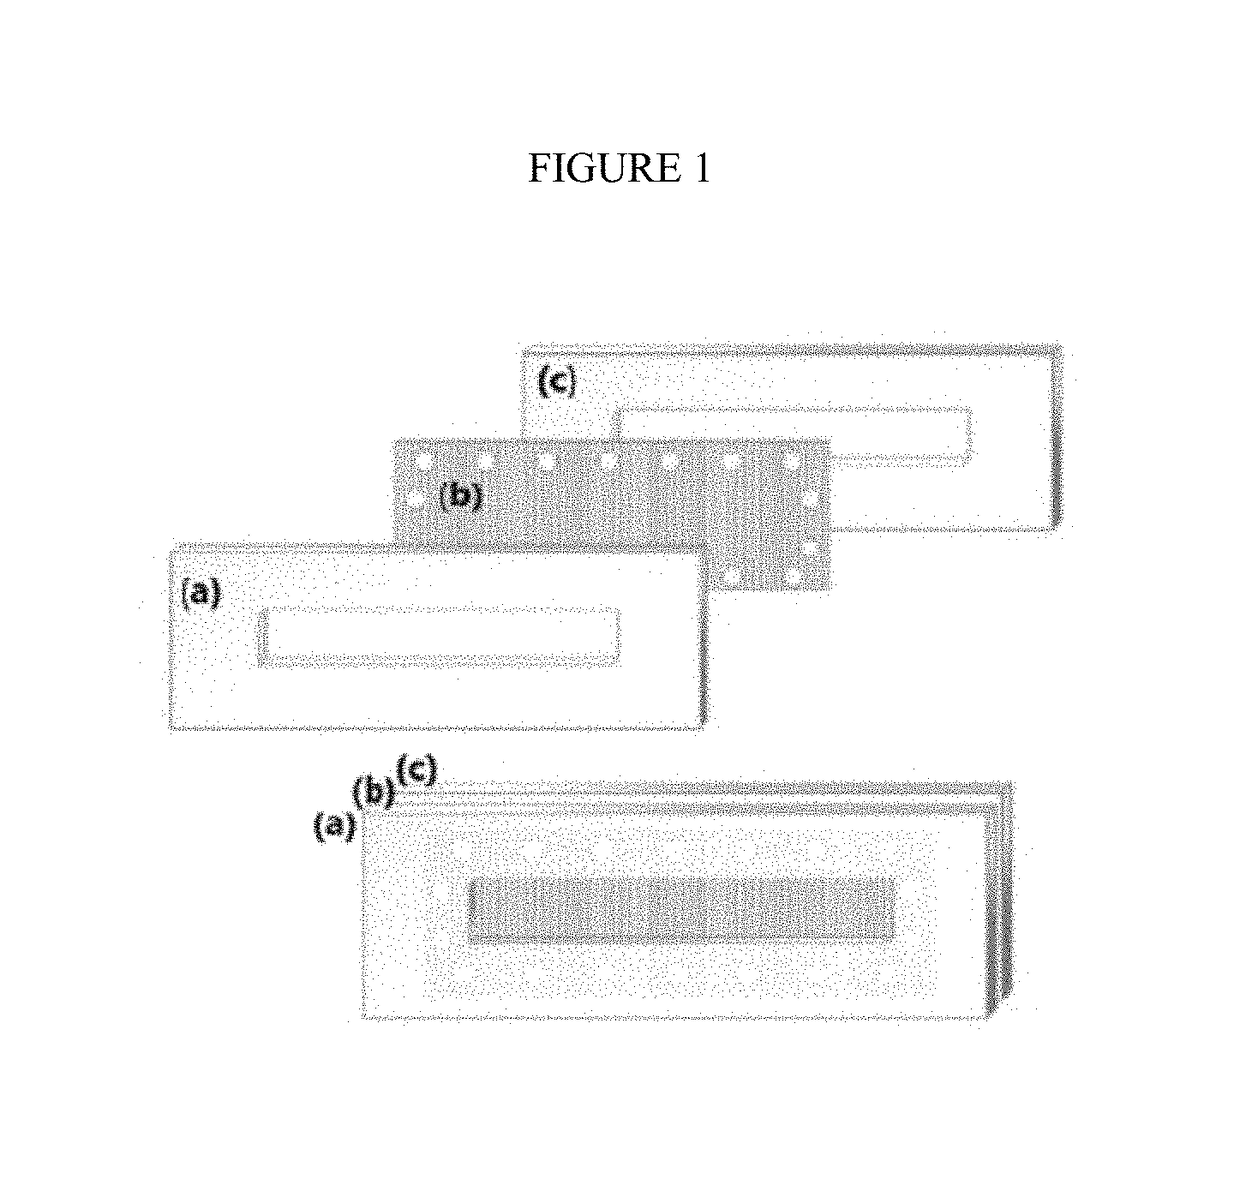 Biomimetic interface device and methods of using the same